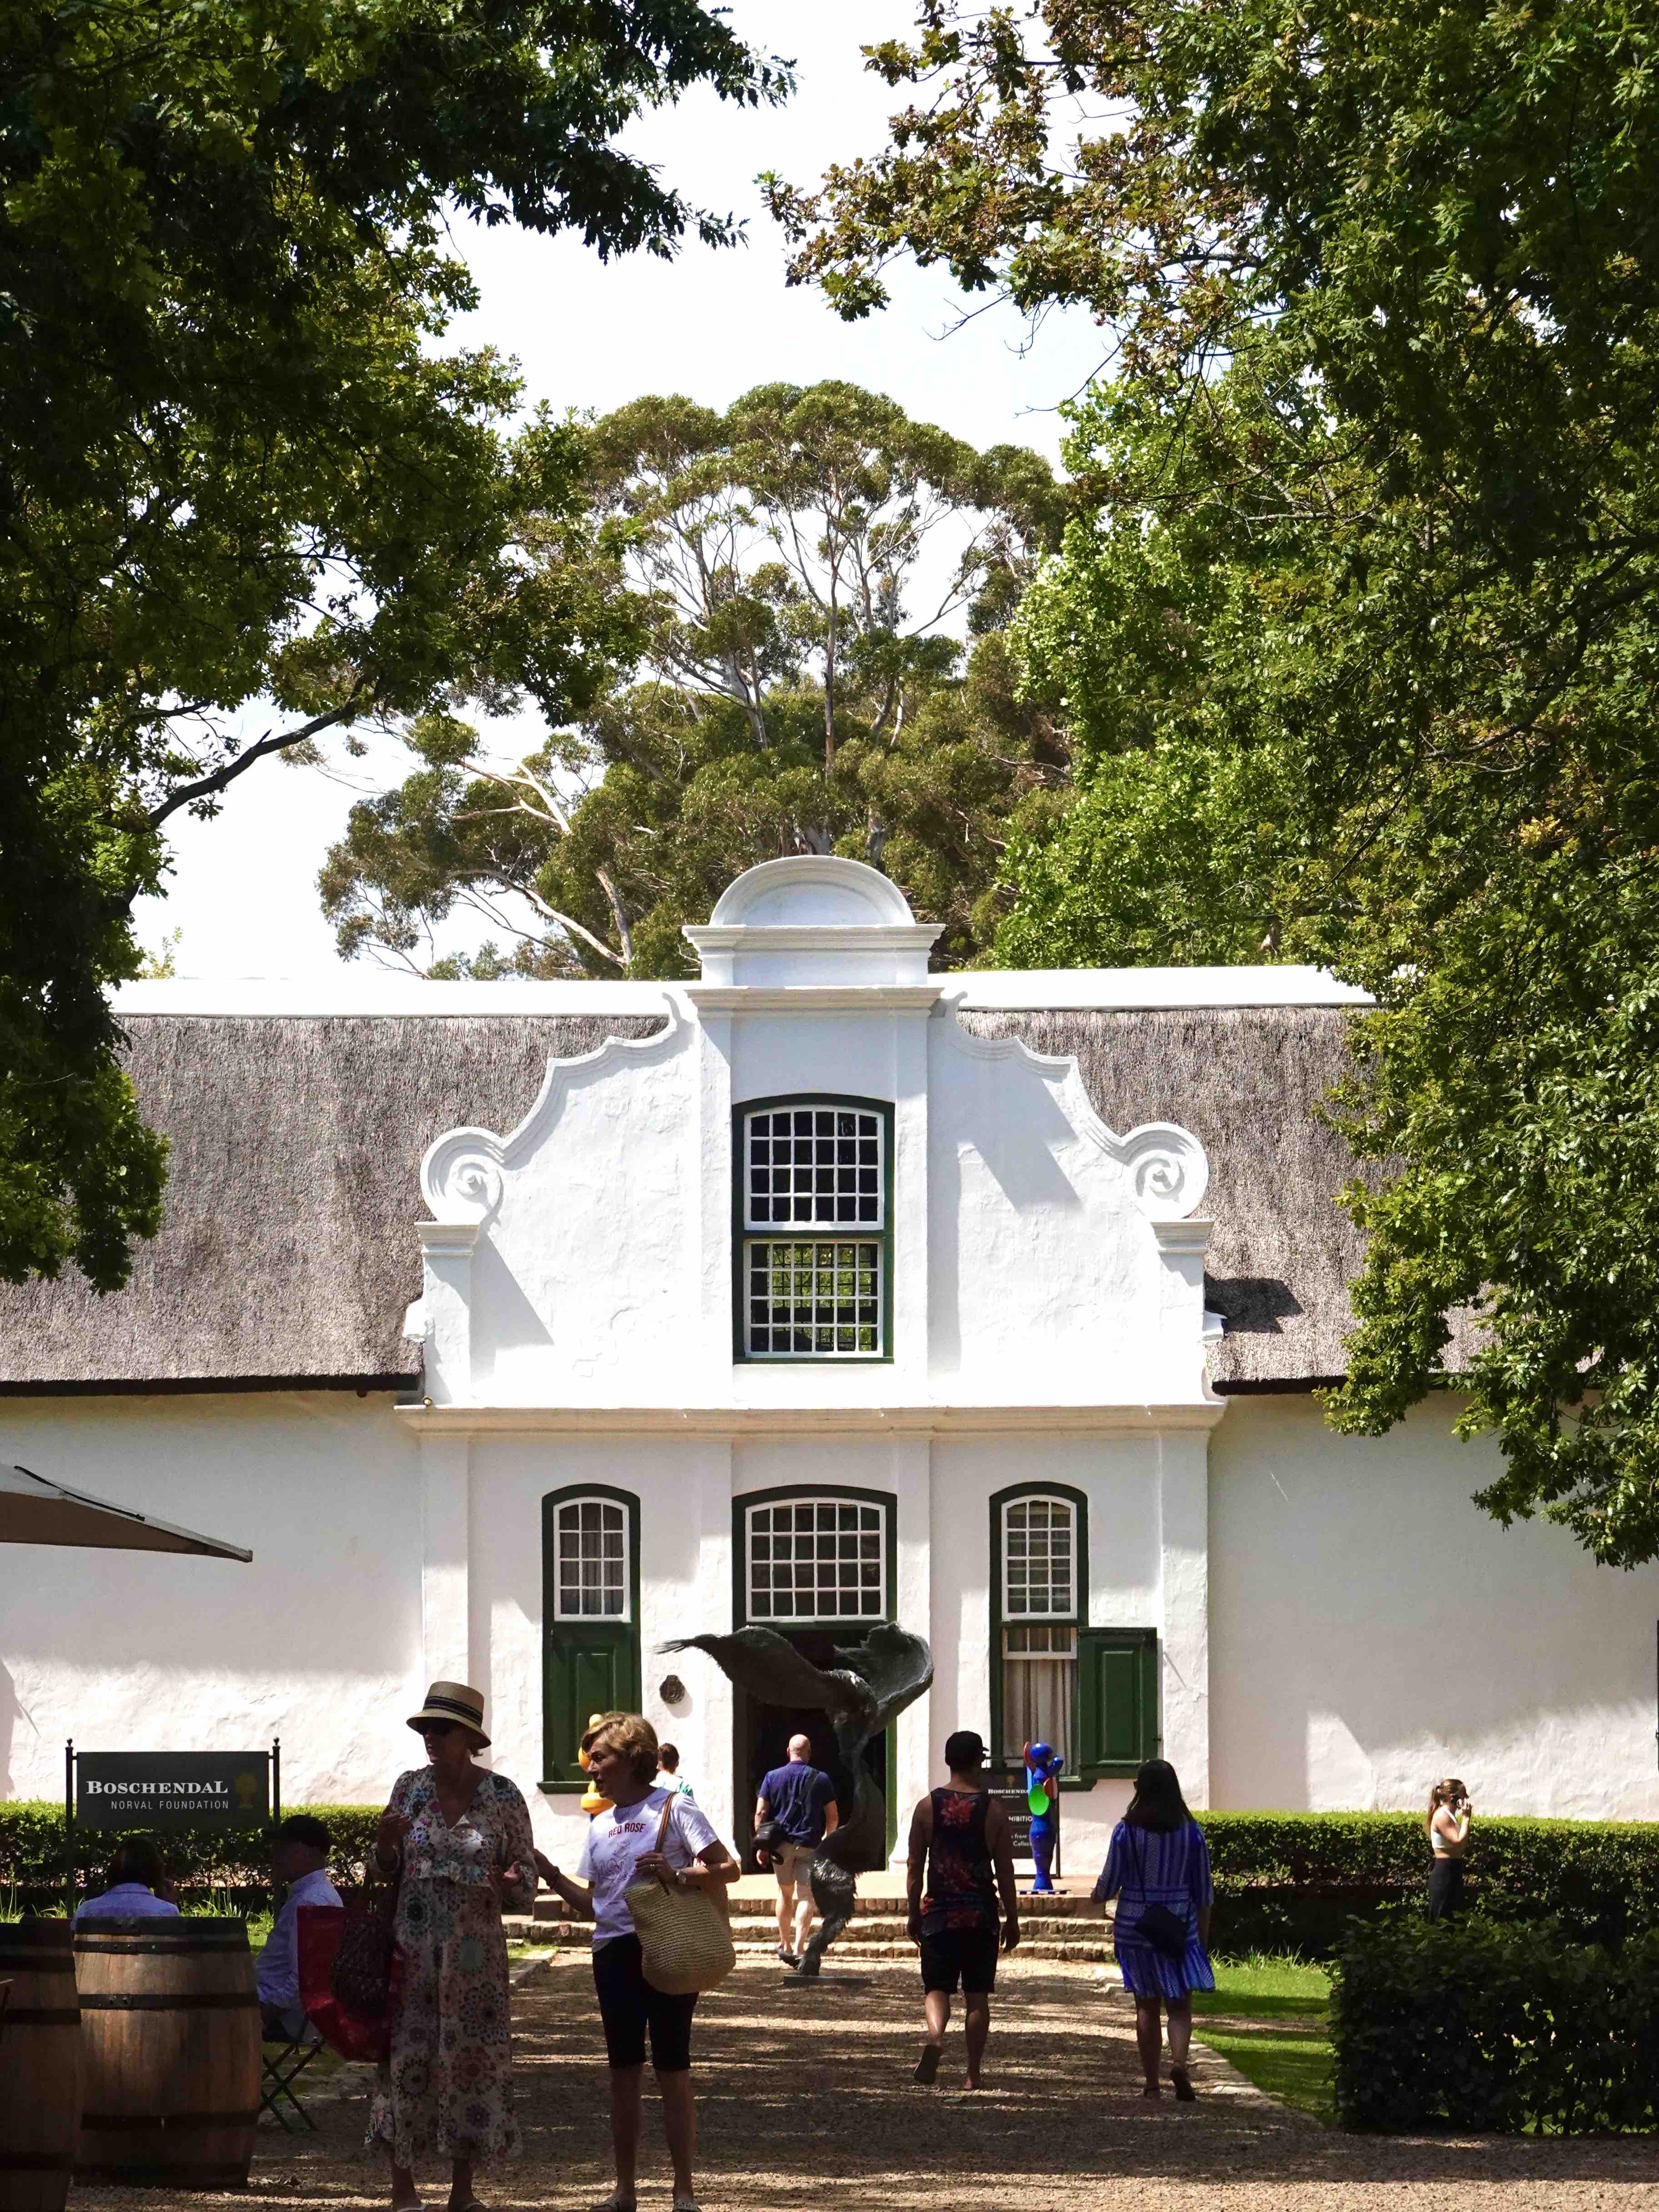 It is worth visiting the Boschendal's restaurant - the Werf, not only for its food but also to experience the Boschendal Estate. It is also conveniently located in the middle of the Winelands so you can easily reach it from either Stellenbosch or Franschhoek. 